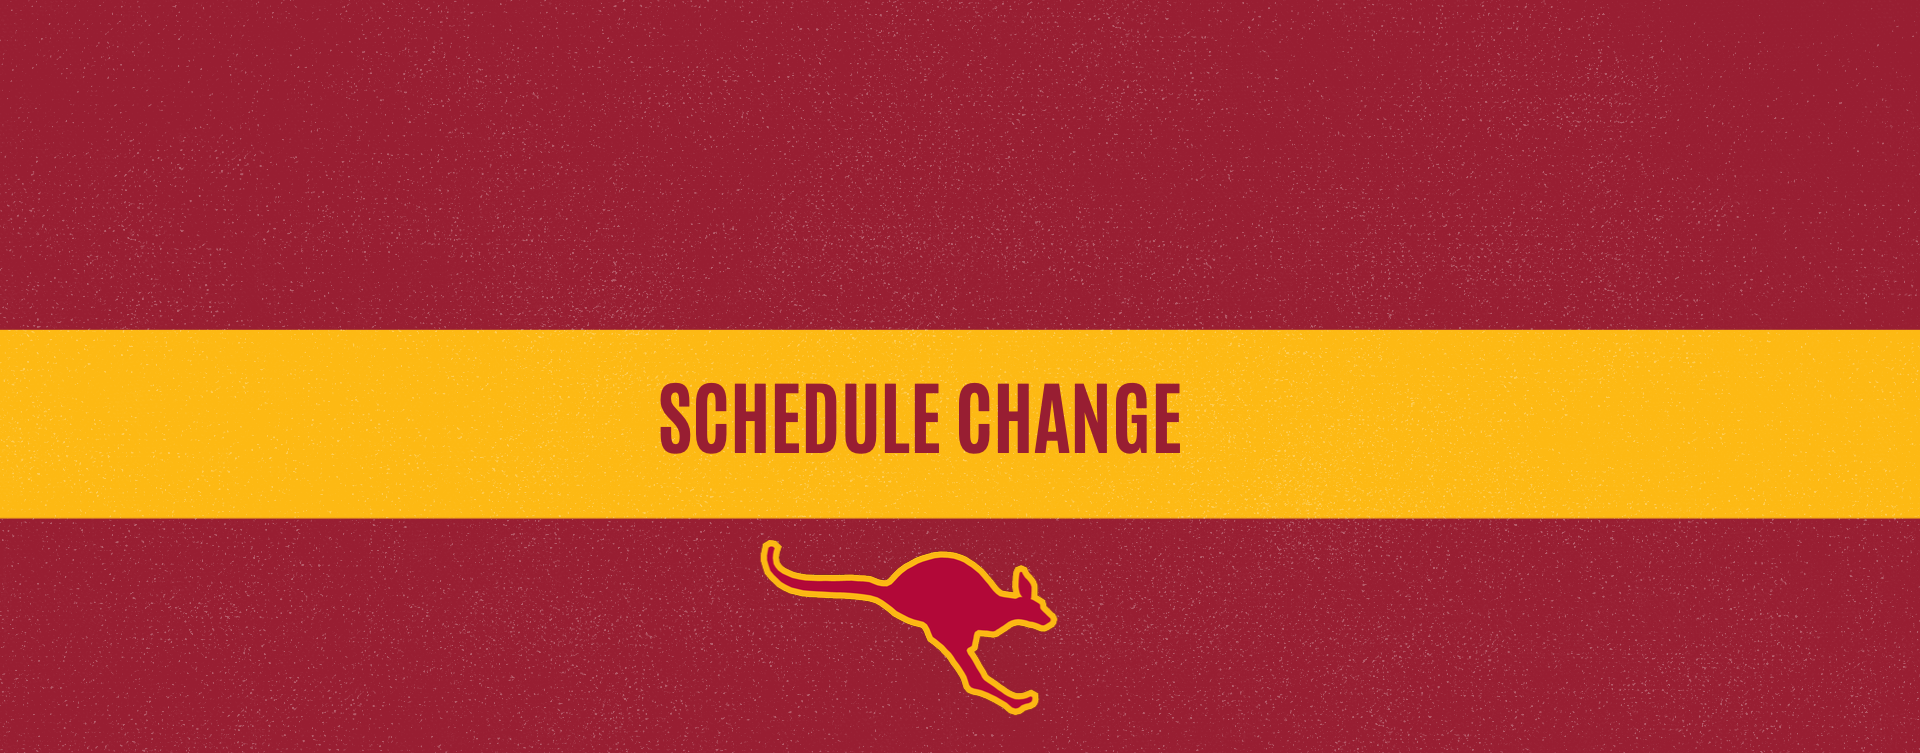 Schedule Updates for 'Roo Tennis and Softball